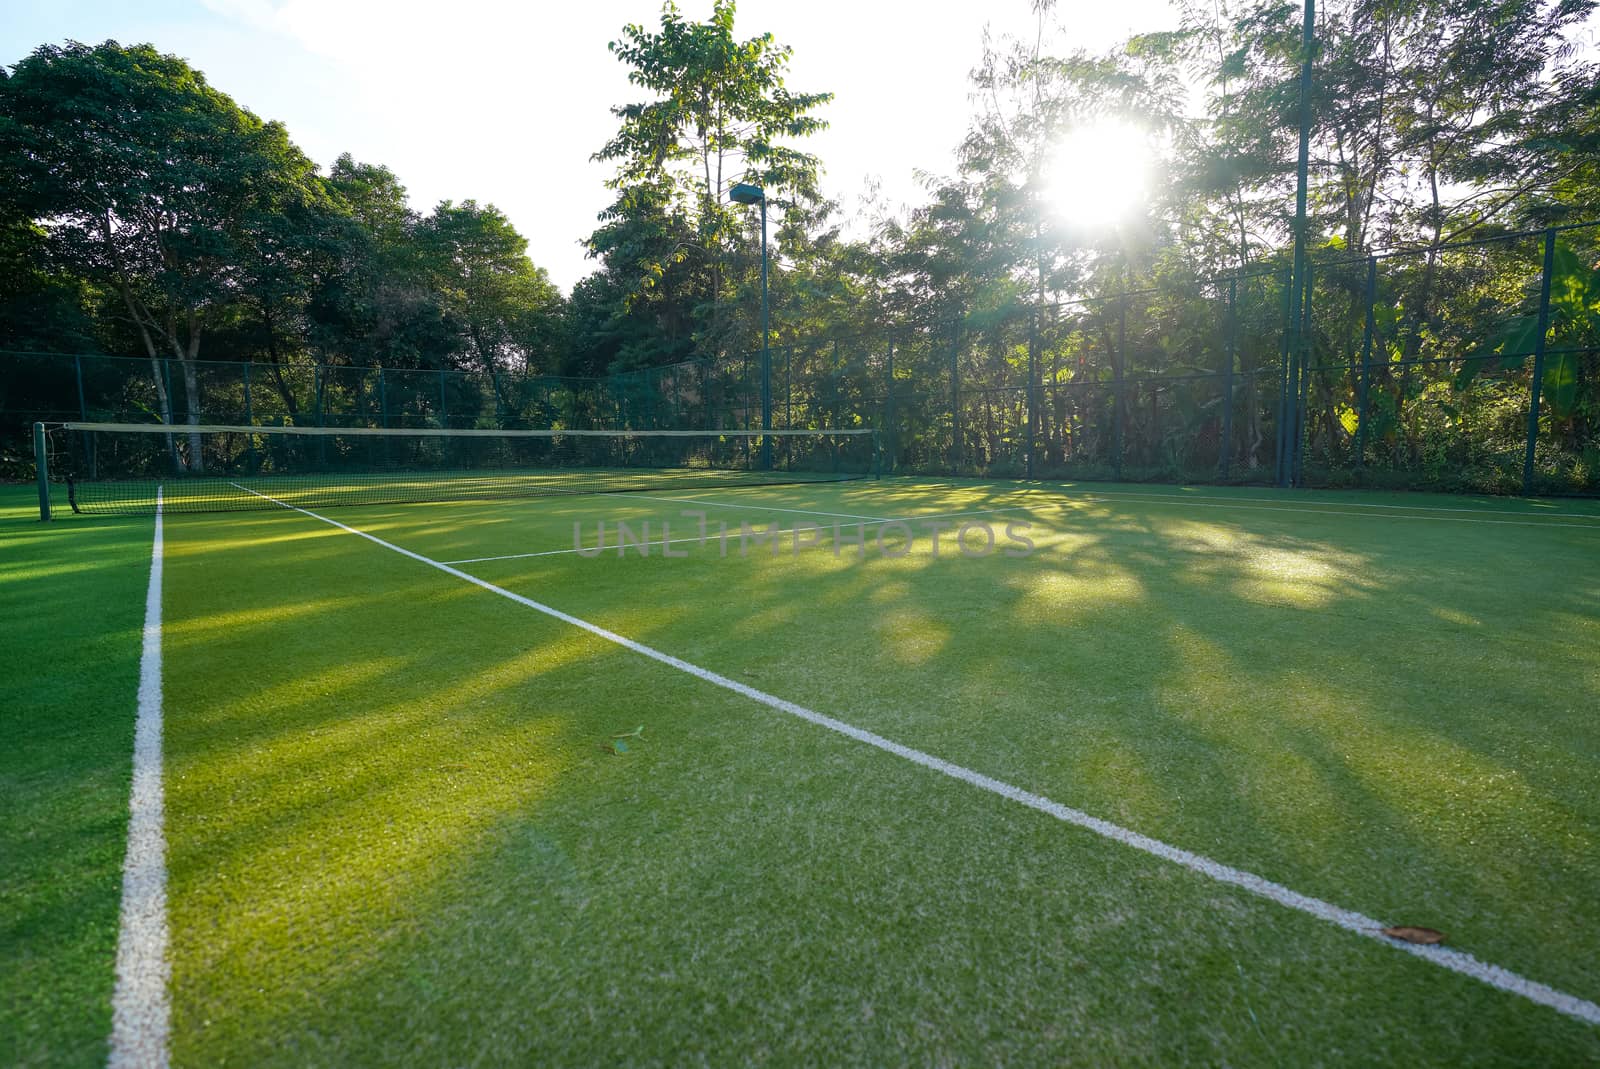 Beautiful scenery View of artificial grass tennis court.